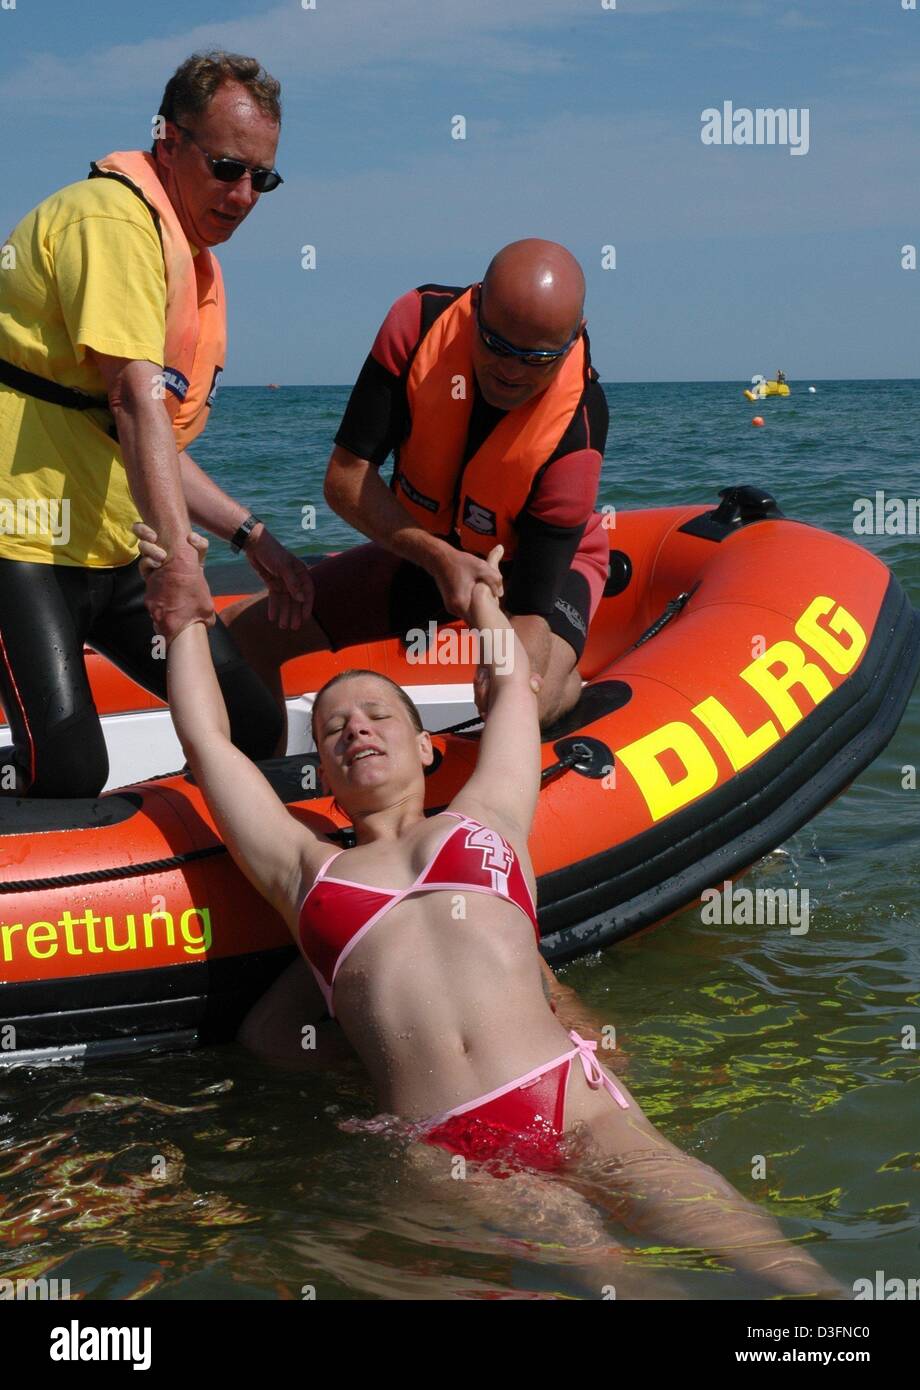 (dpa) - DLRG (German life saving federation) lifeguards demonstrate saving a swimmer during an emergency drill on the beach of Baltic Sea resort Binz, Germany, 1 August 2004. Research results in 2004 showed that a fourth of the German population aged over 14 can only swim very badly or not at all. The DLRG therefore calls for cities to avoid closing down public pools and provide mo Stock Photo